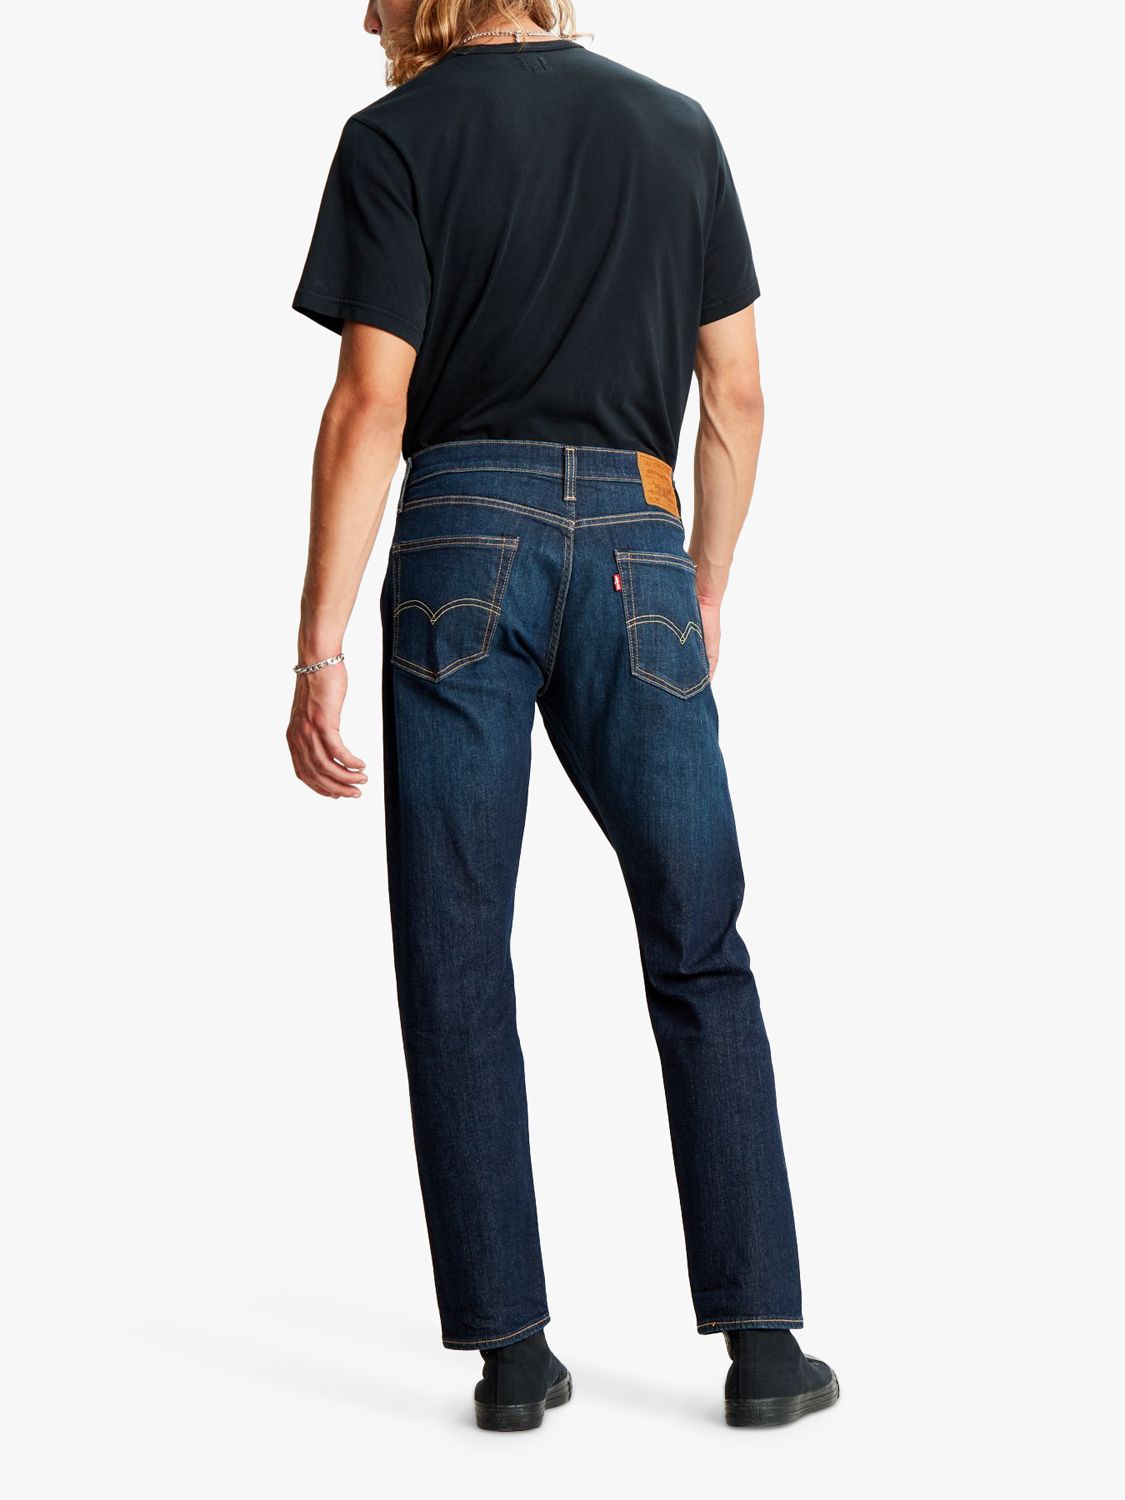 Levi's Big & Tall 502 Tapered Jeans, Biologia at John Lewis & Partners